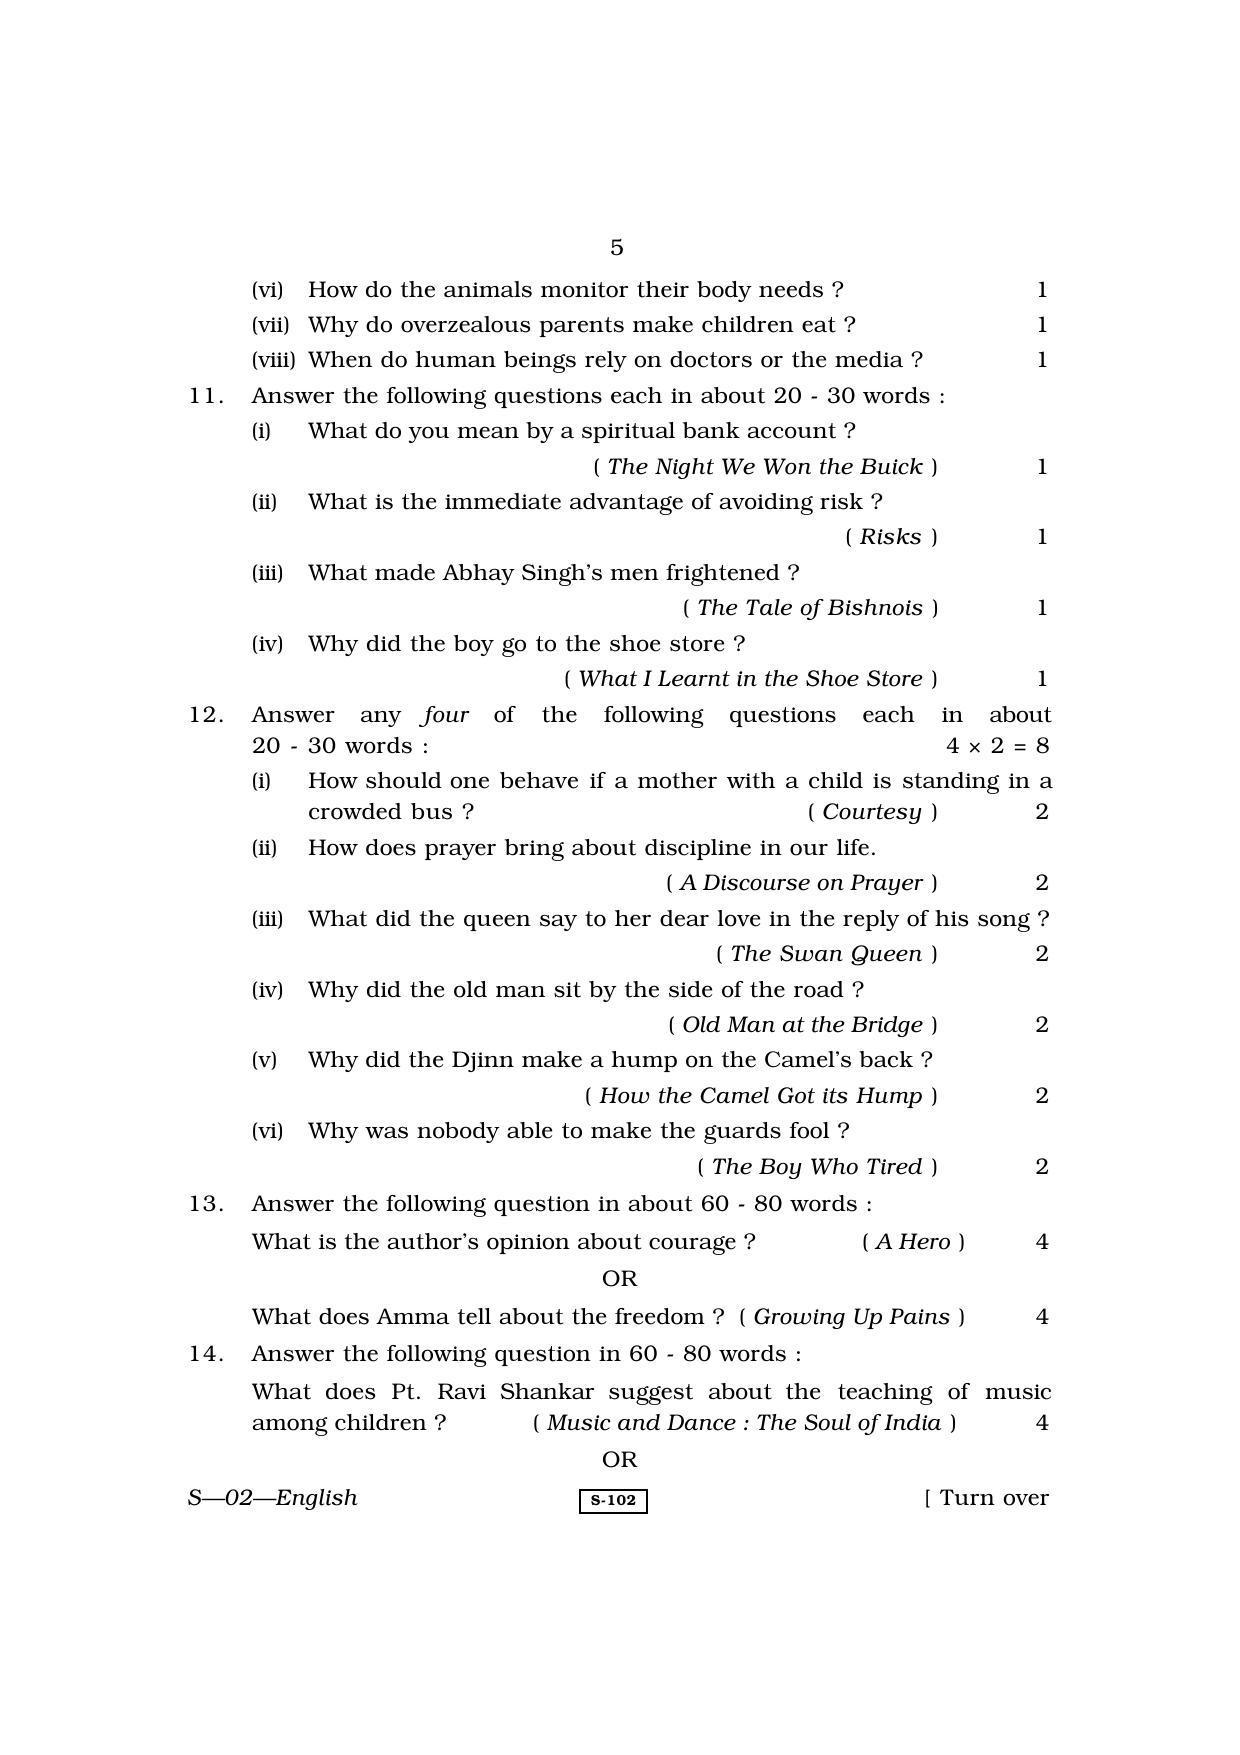 RBSE Class 10 English 2010 Question Paper - Page 5